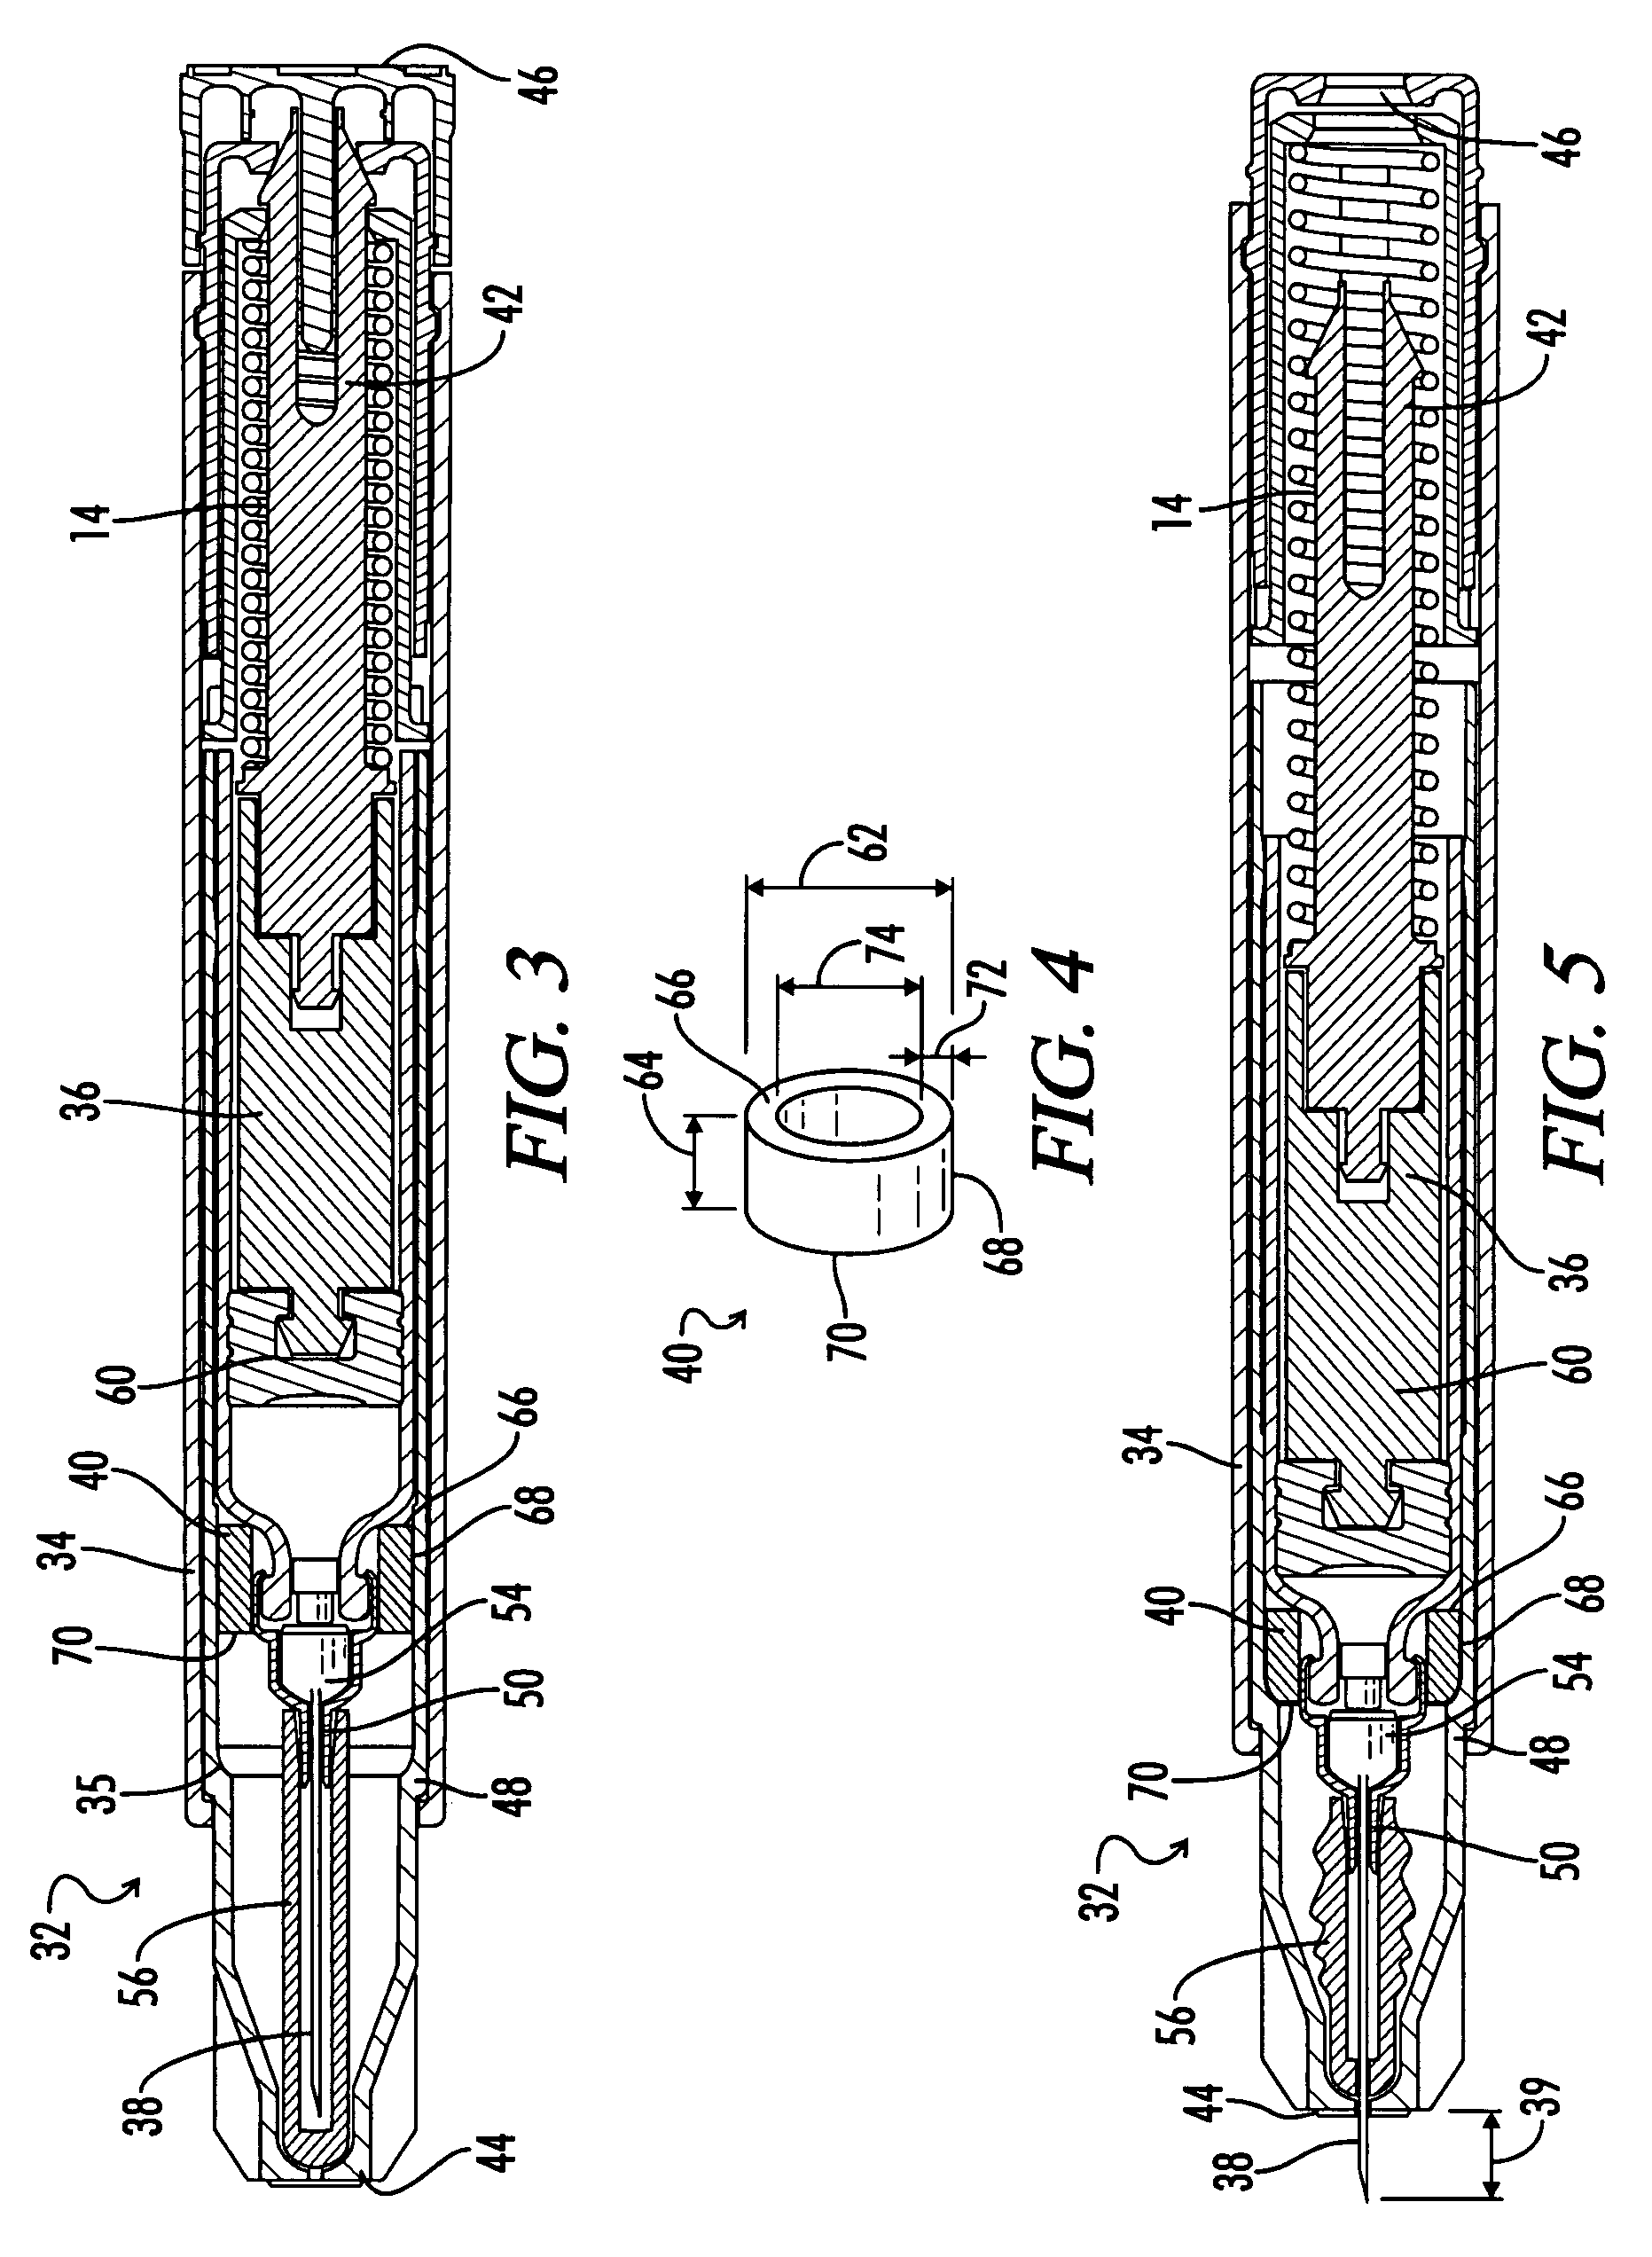 Autoinjector with needle depth adapter